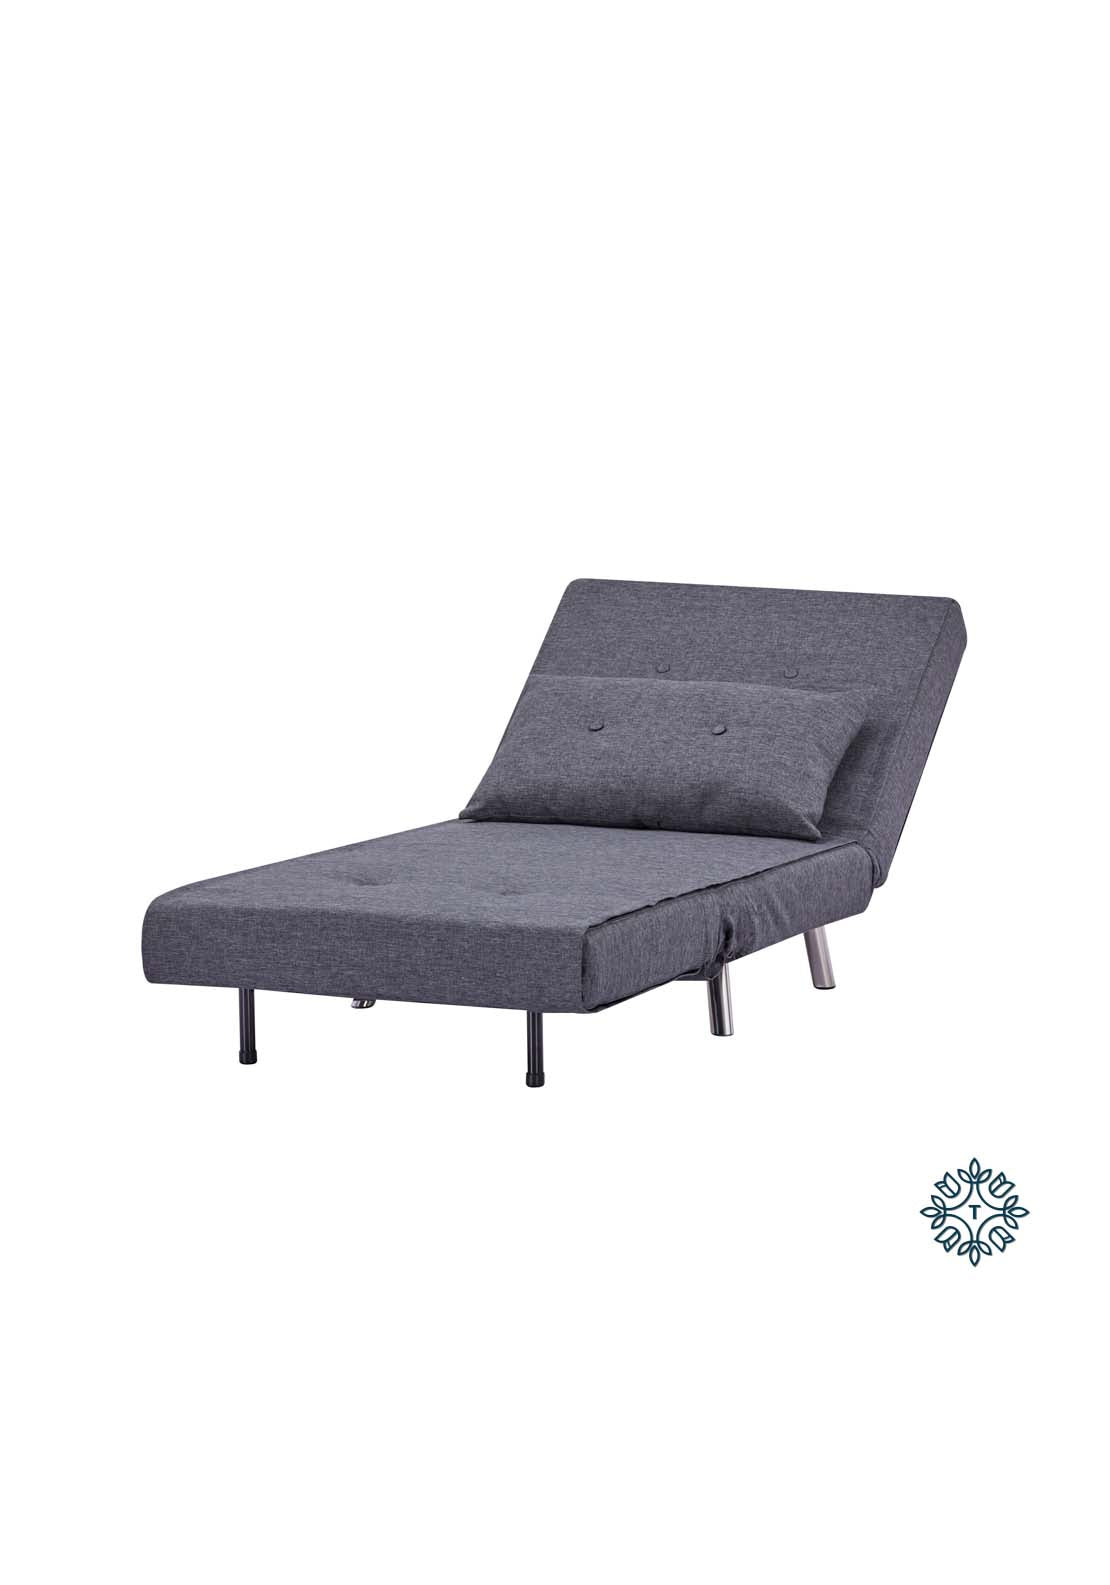 The Home Collection Haru Single Sofa Bed - Grey 4 Shaws Department Stores